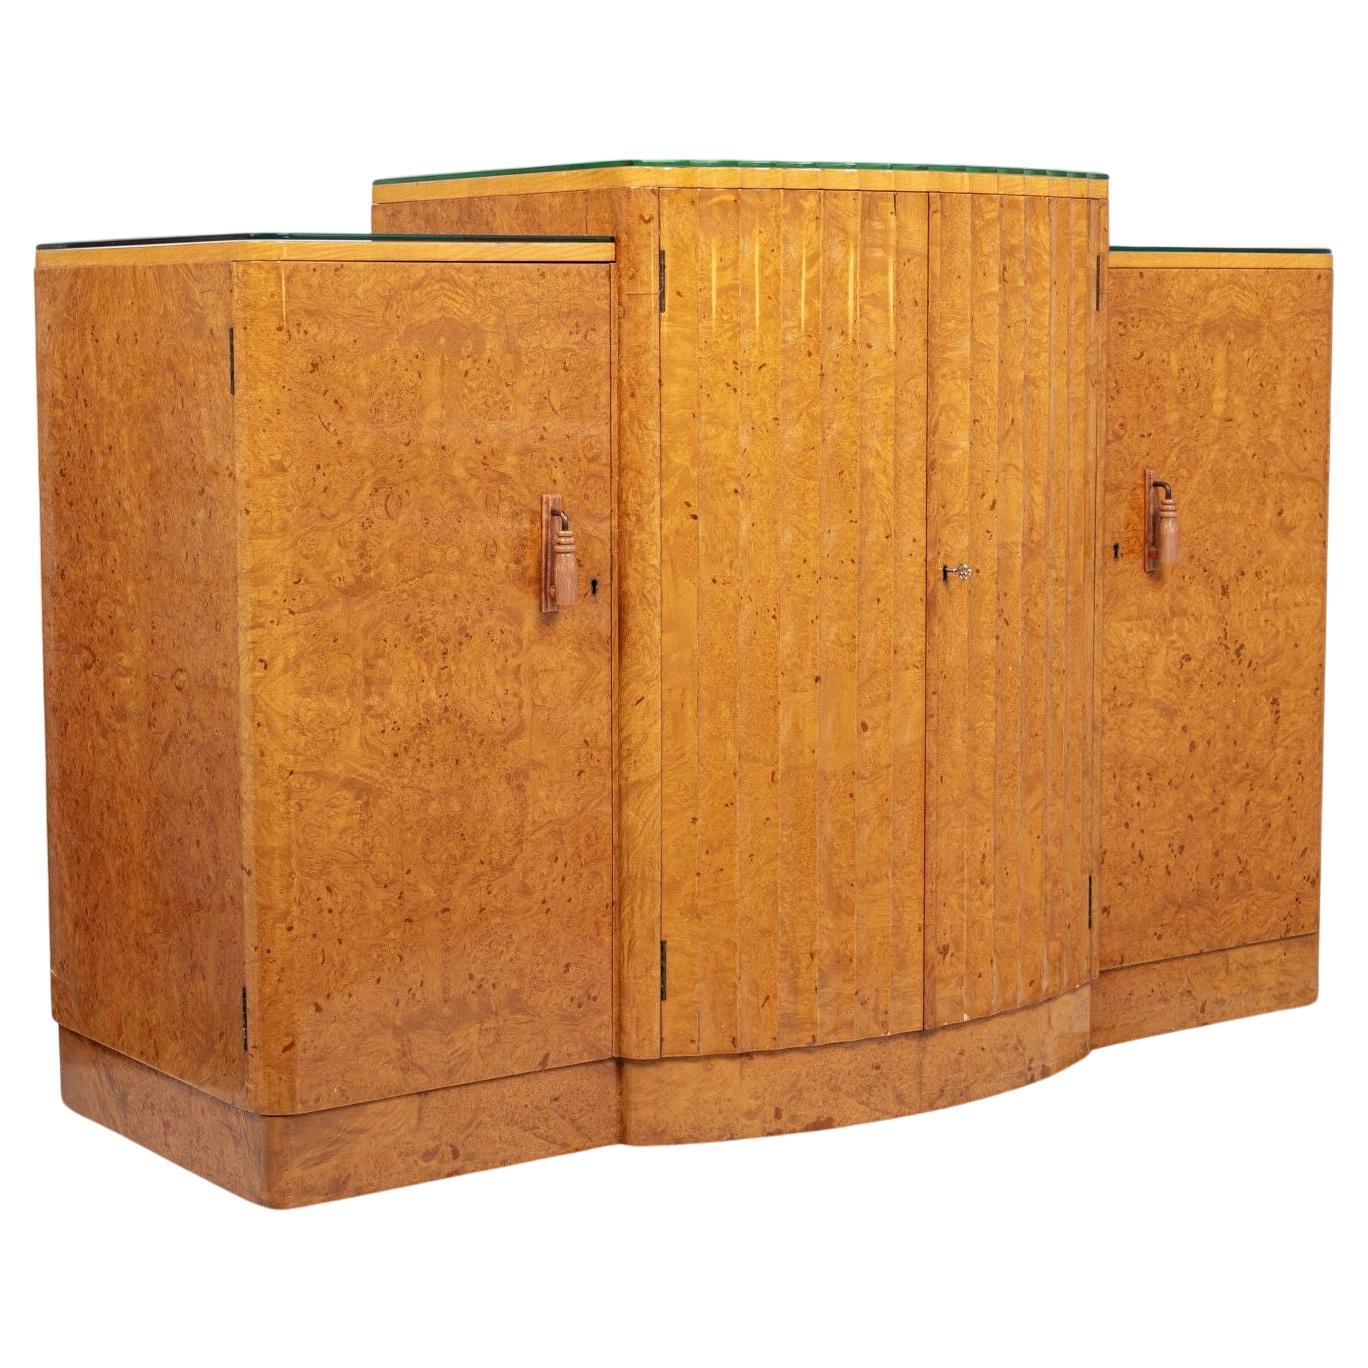 Exceptional Antique Art Deco Maple Wood Bar Cabinet or Sideboard 1930s For Sale